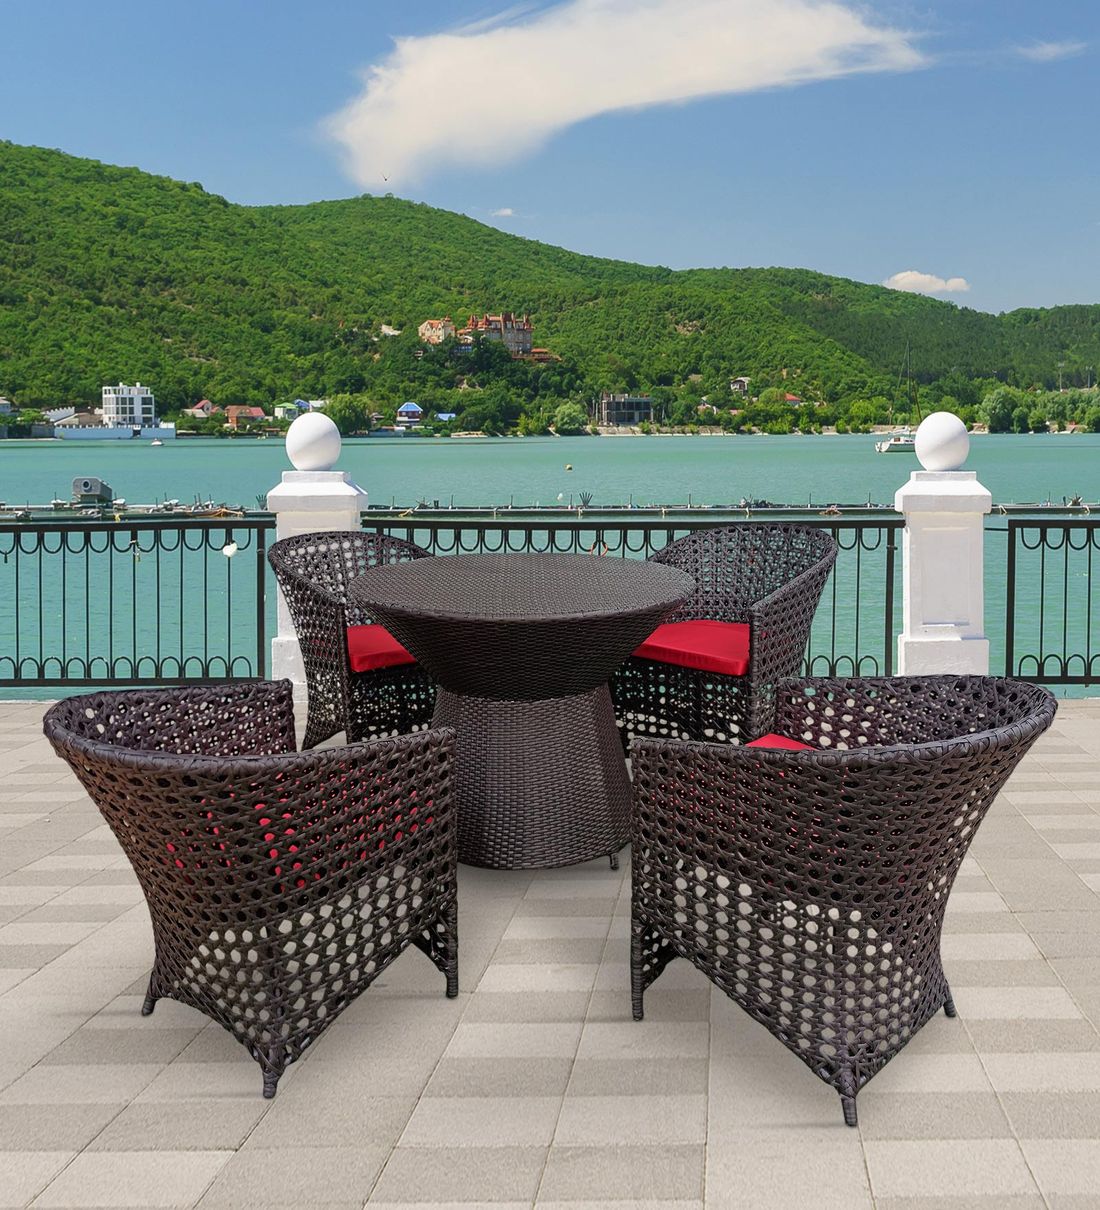 Dreamline Outdoor Furniture Garden Patio Seating Set 1+4 4 Chairs and Table Set Balcony Furniture Coffee Table Set (Brown)